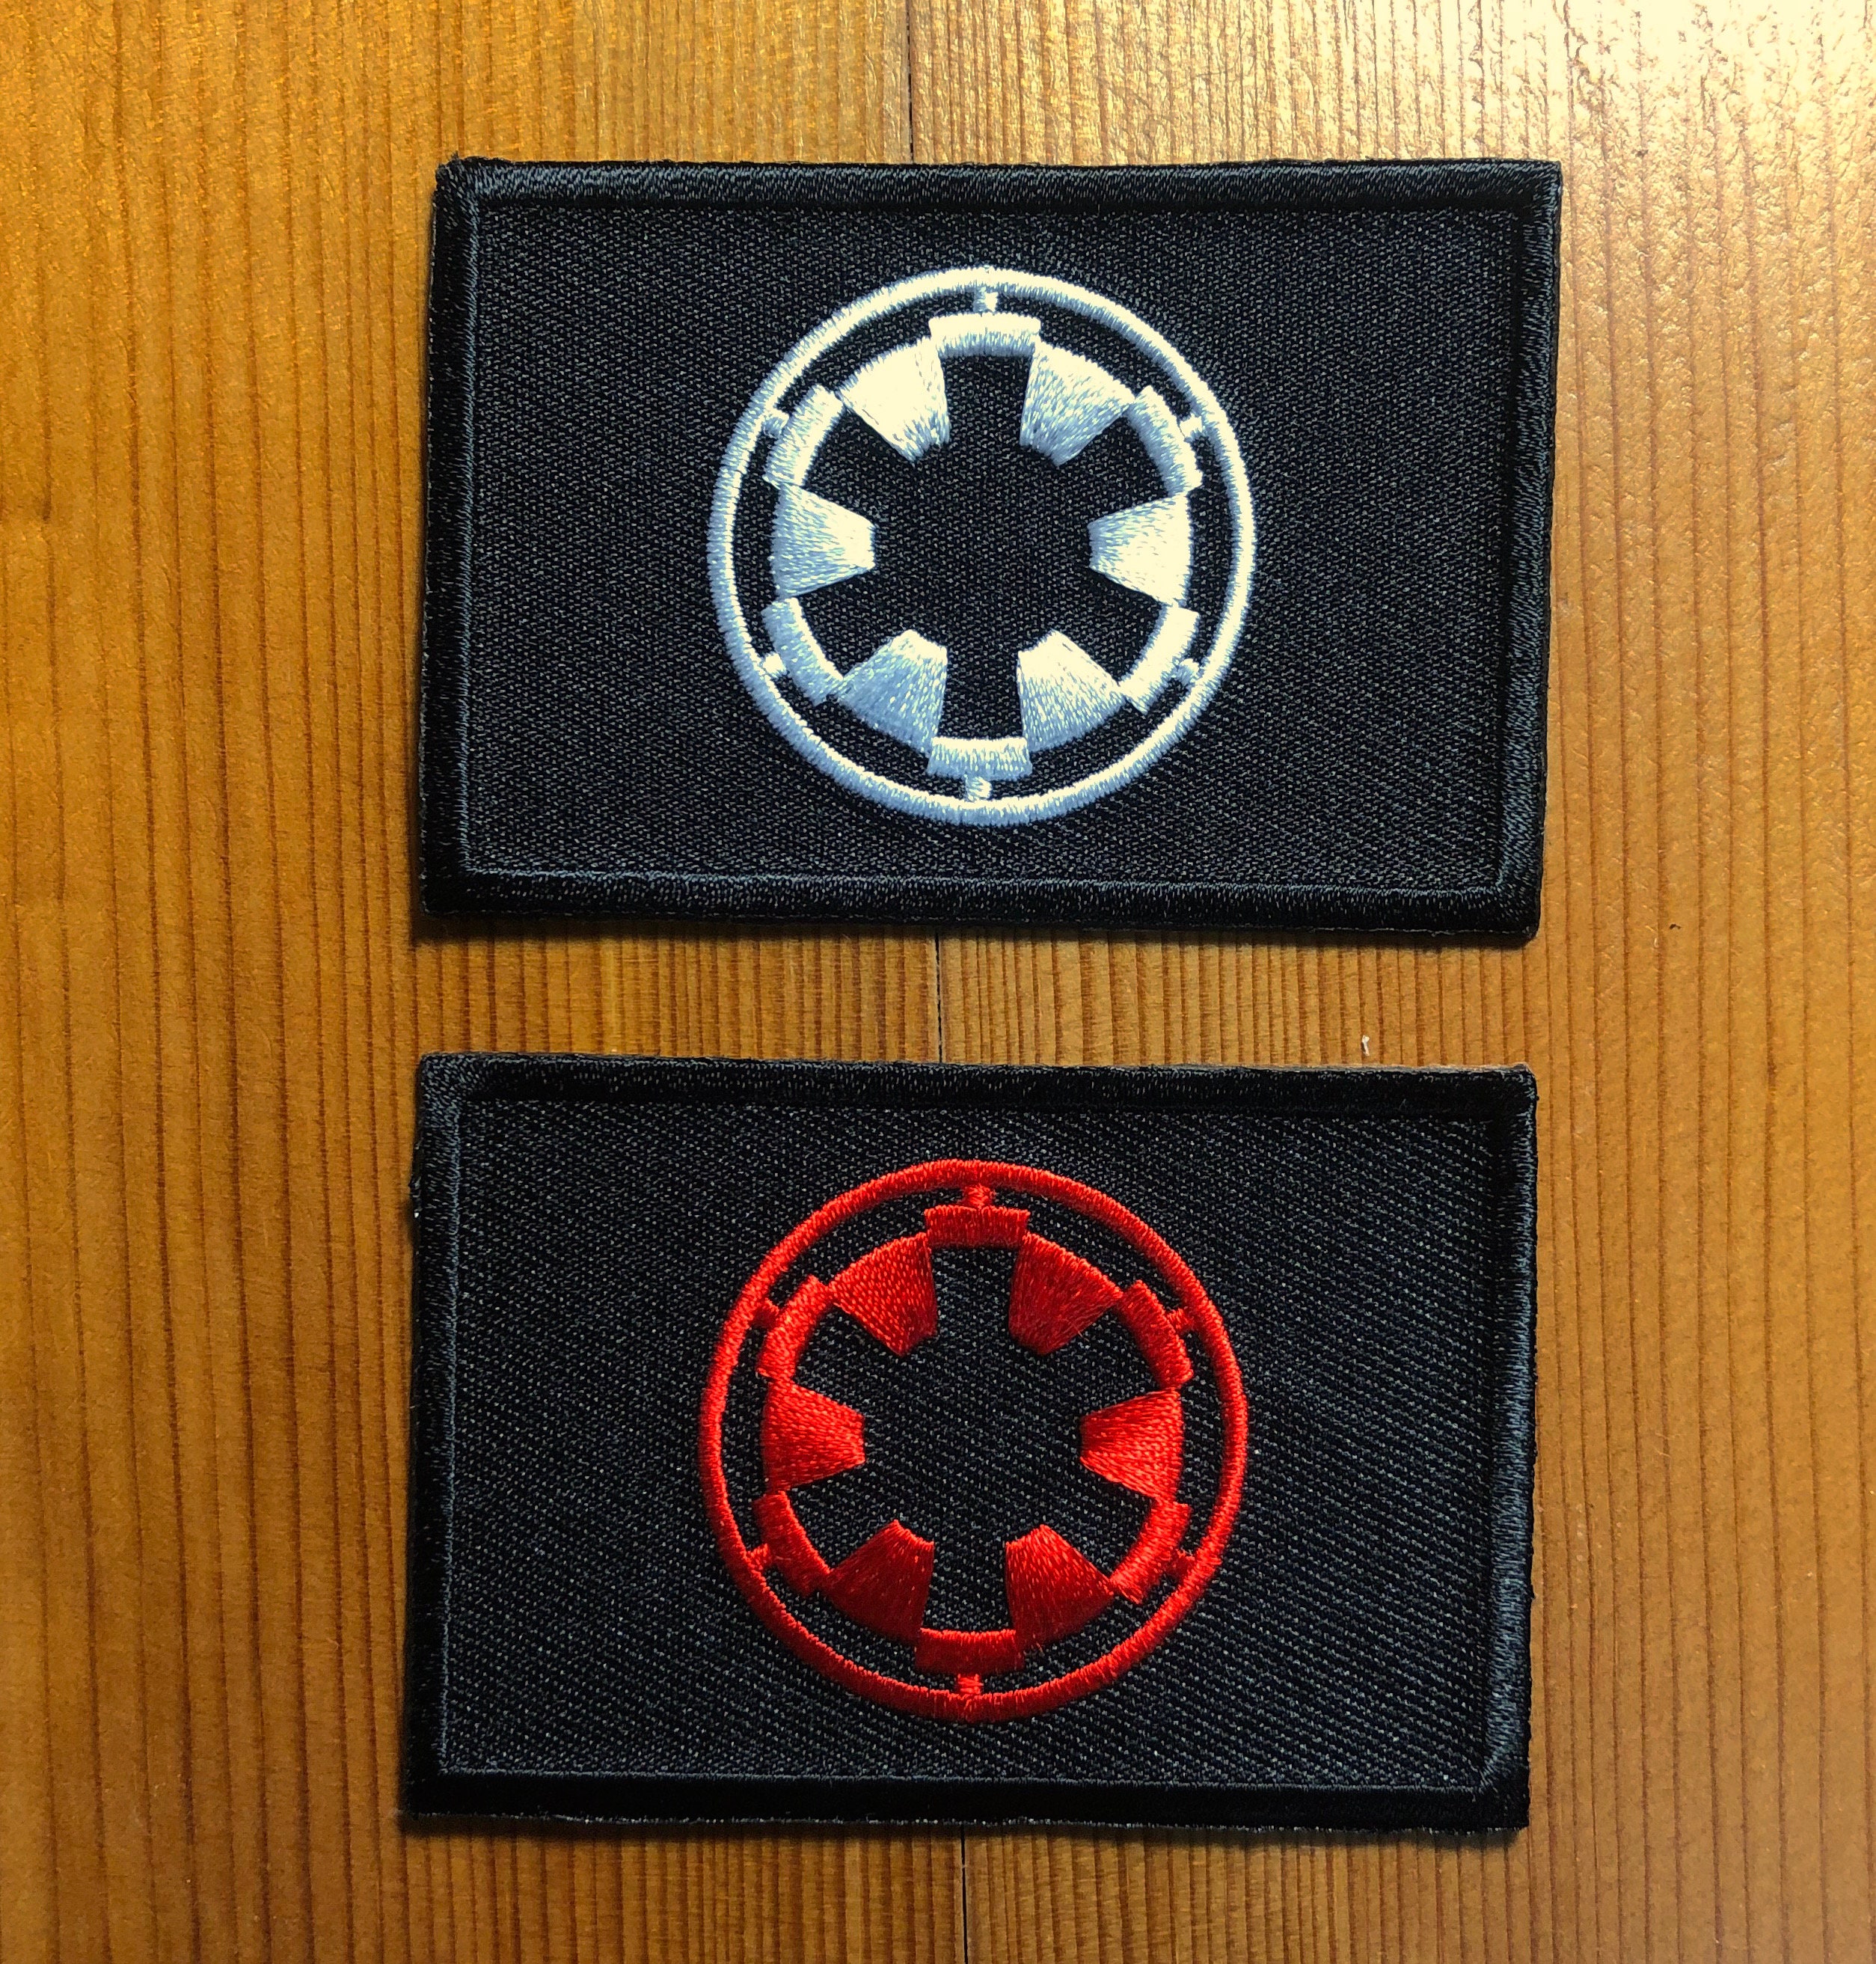 IMPERIAL ARMY Fleet Flag Patch Morale Fighter Star Wars Han - Etsy